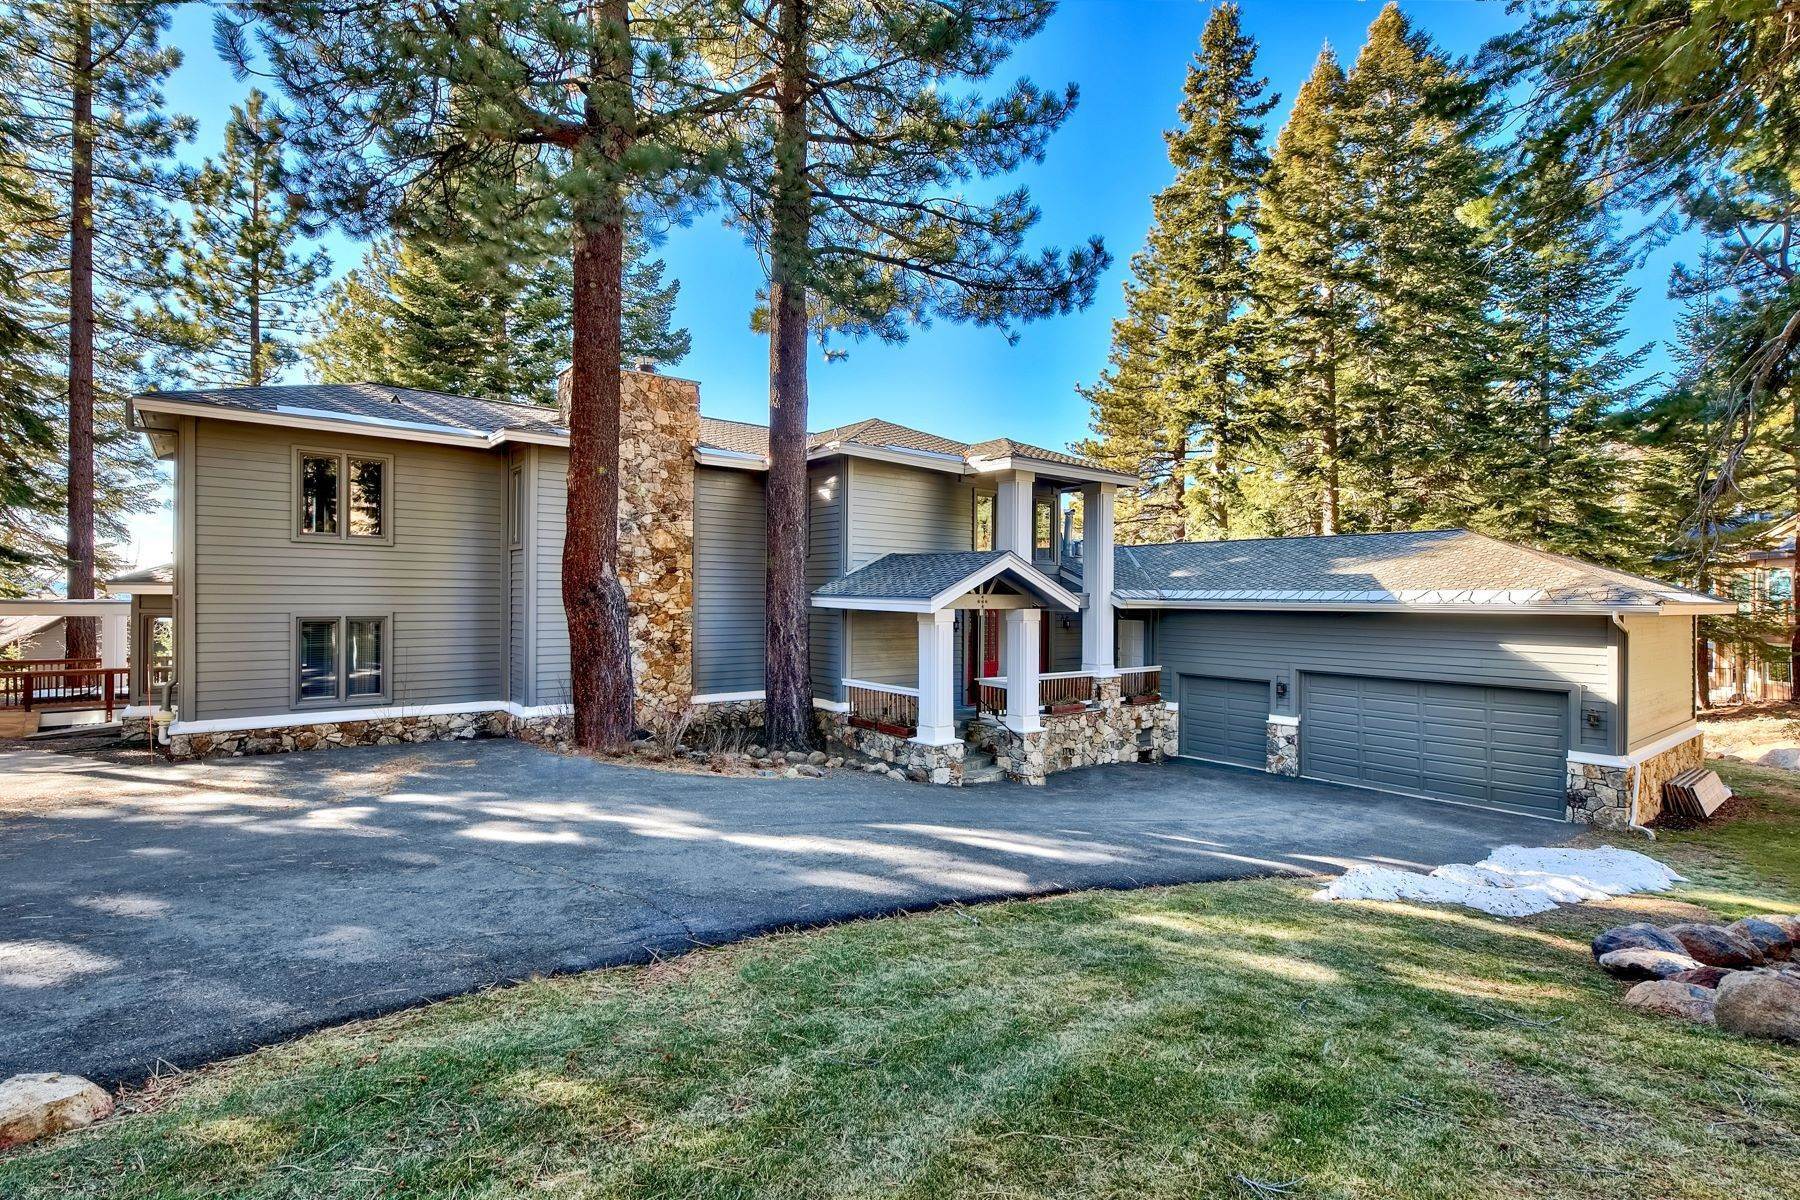 Single Family Homes for Active at Stylish Home On Eastern Slope 959 Fairview Blvd Incline Village, Nevada 89451 United States